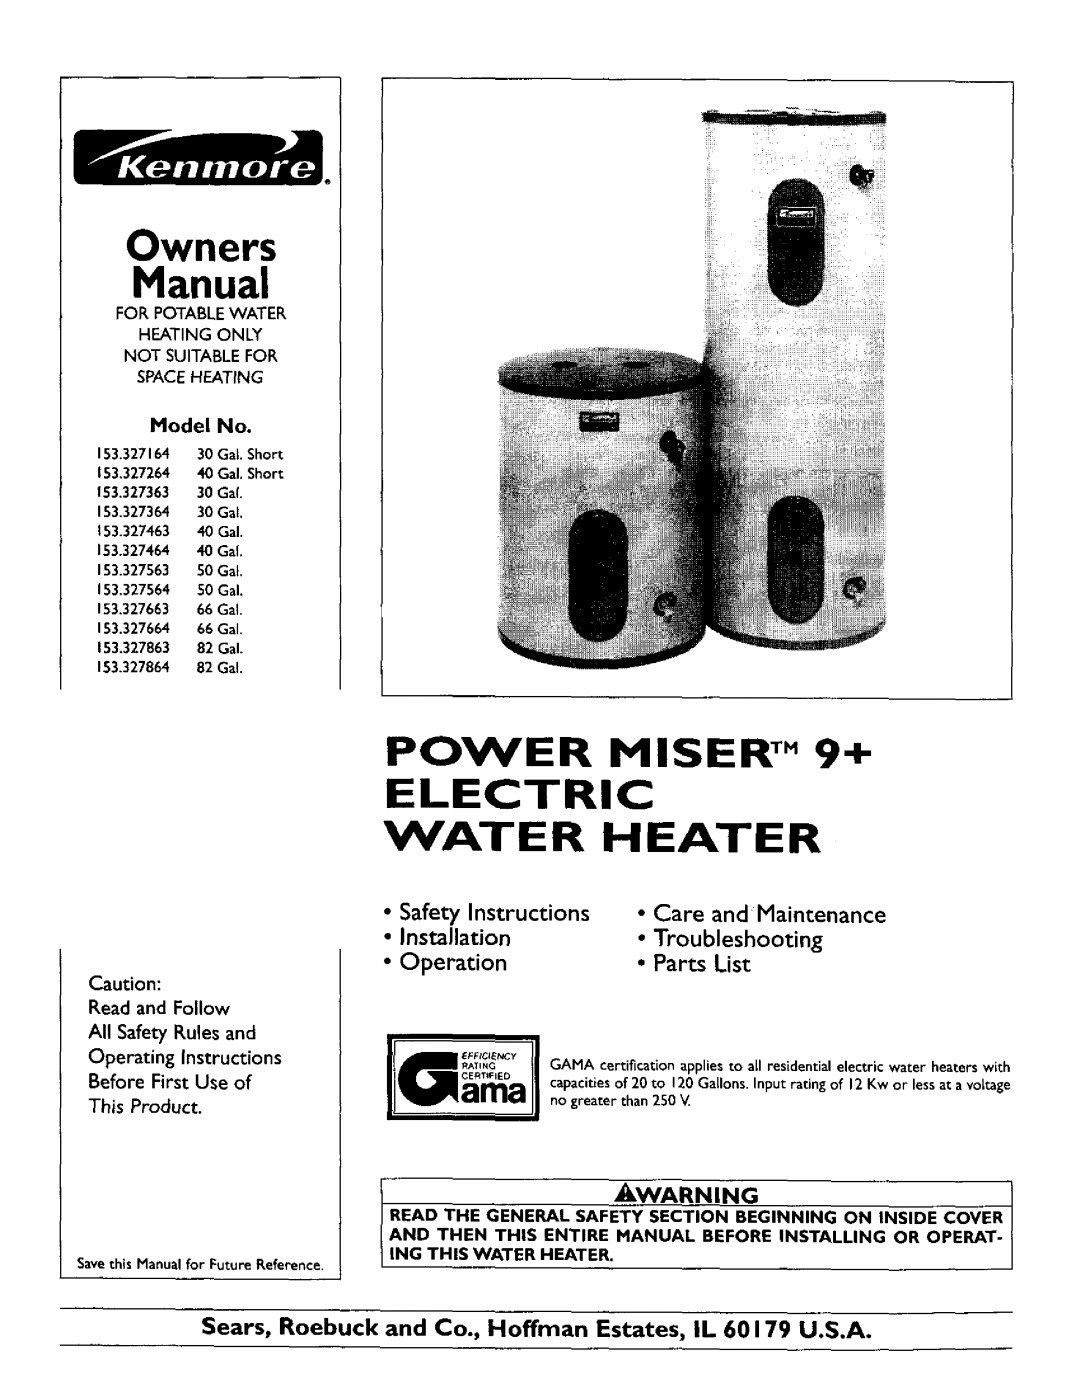 Kenmore 153.327664 owner manual Owners, Manual, POWER MISER TM 9+ ELECTRIC WATER HEATER, Installation, Troubleshooting 